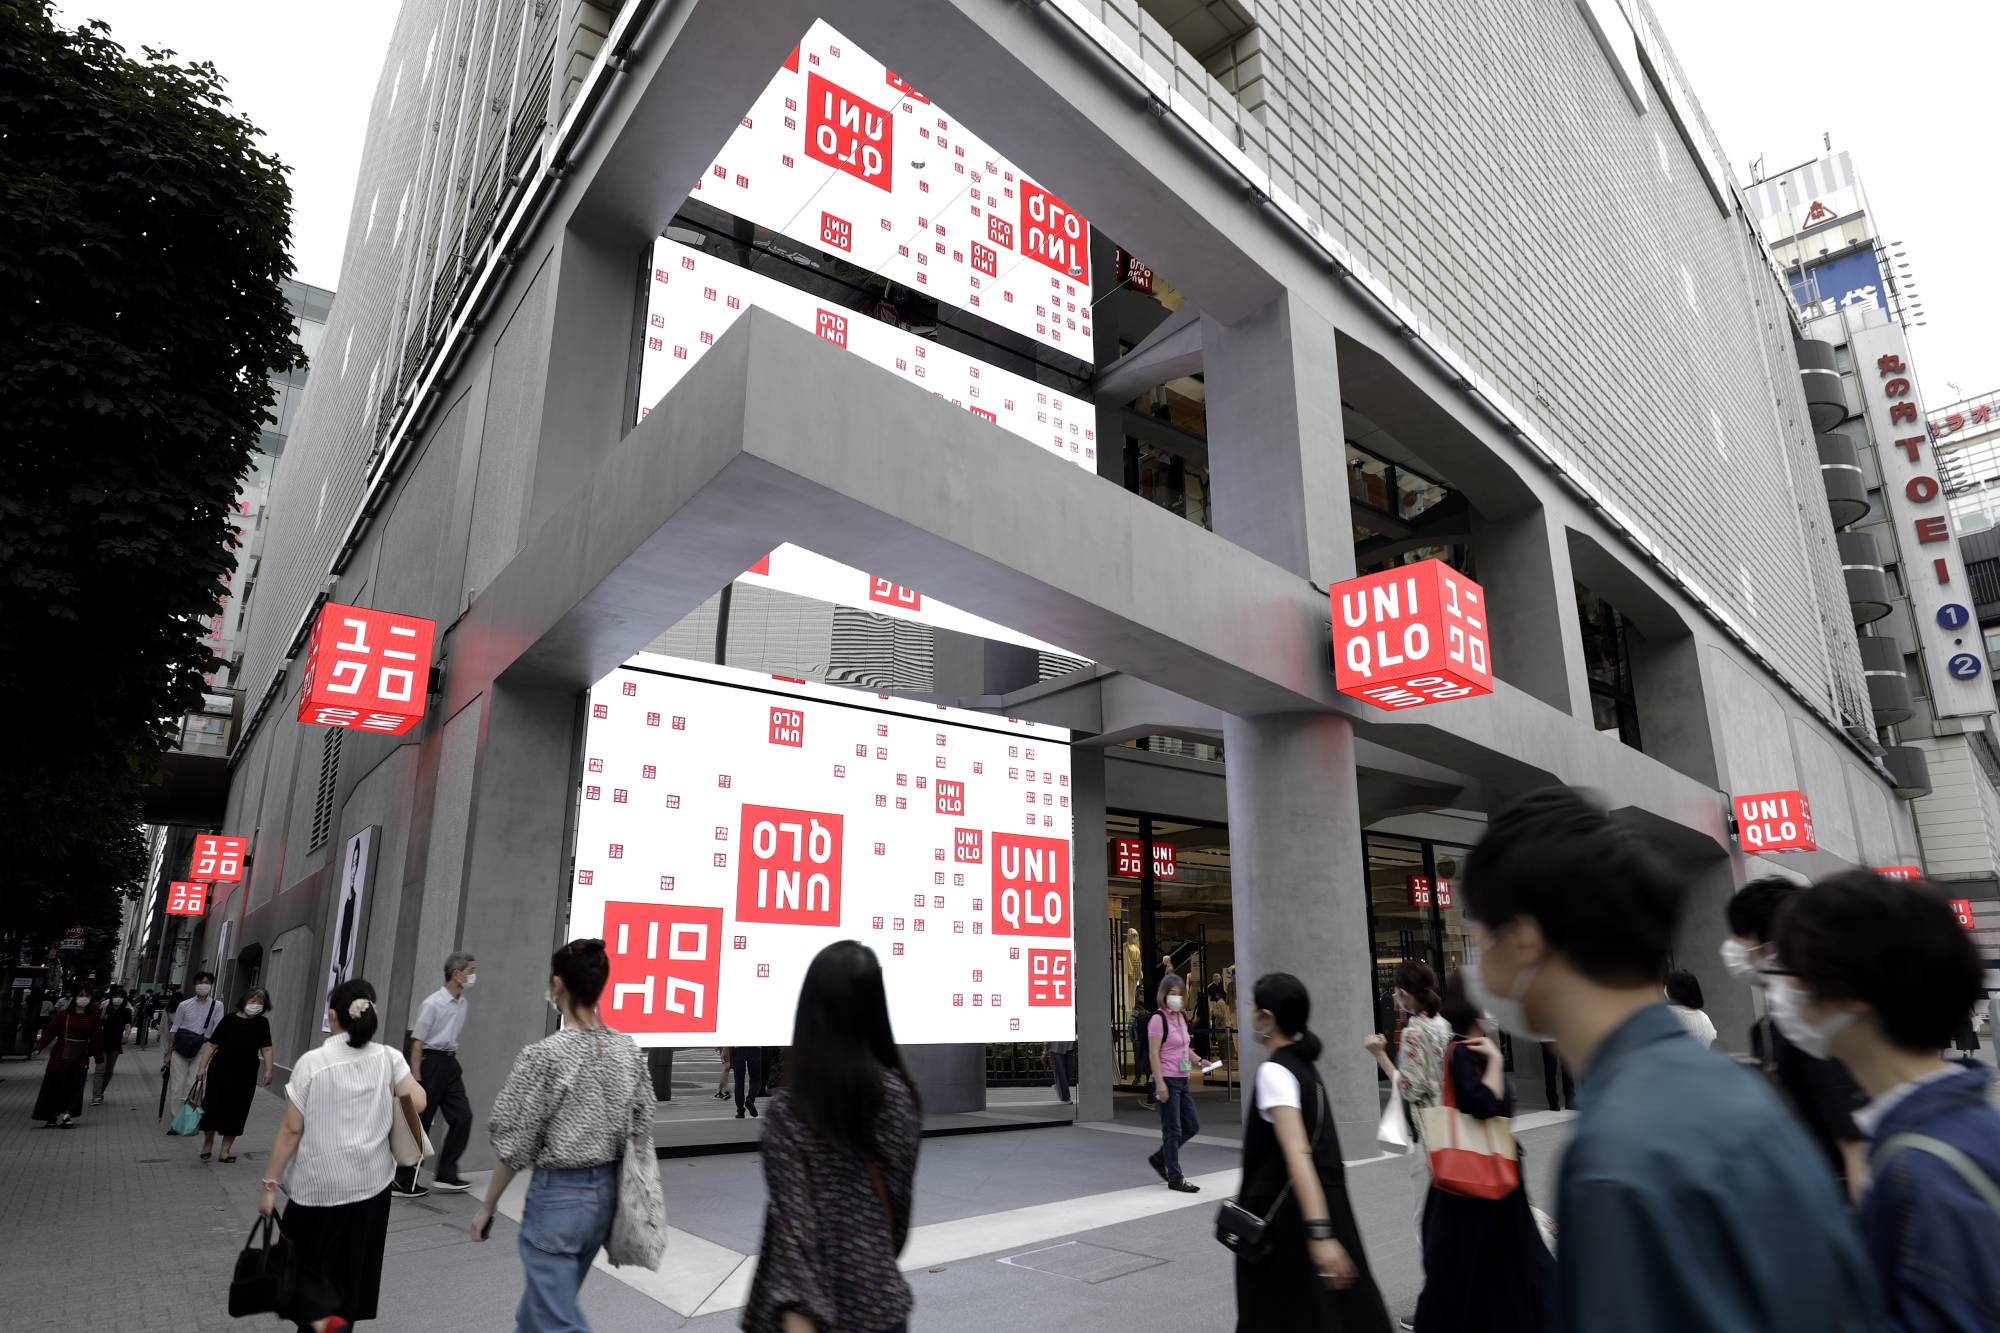 UNIQLO Malaysia  OUR FIRST ROADSIDE STORE IN MALAYSIA IS  Facebook